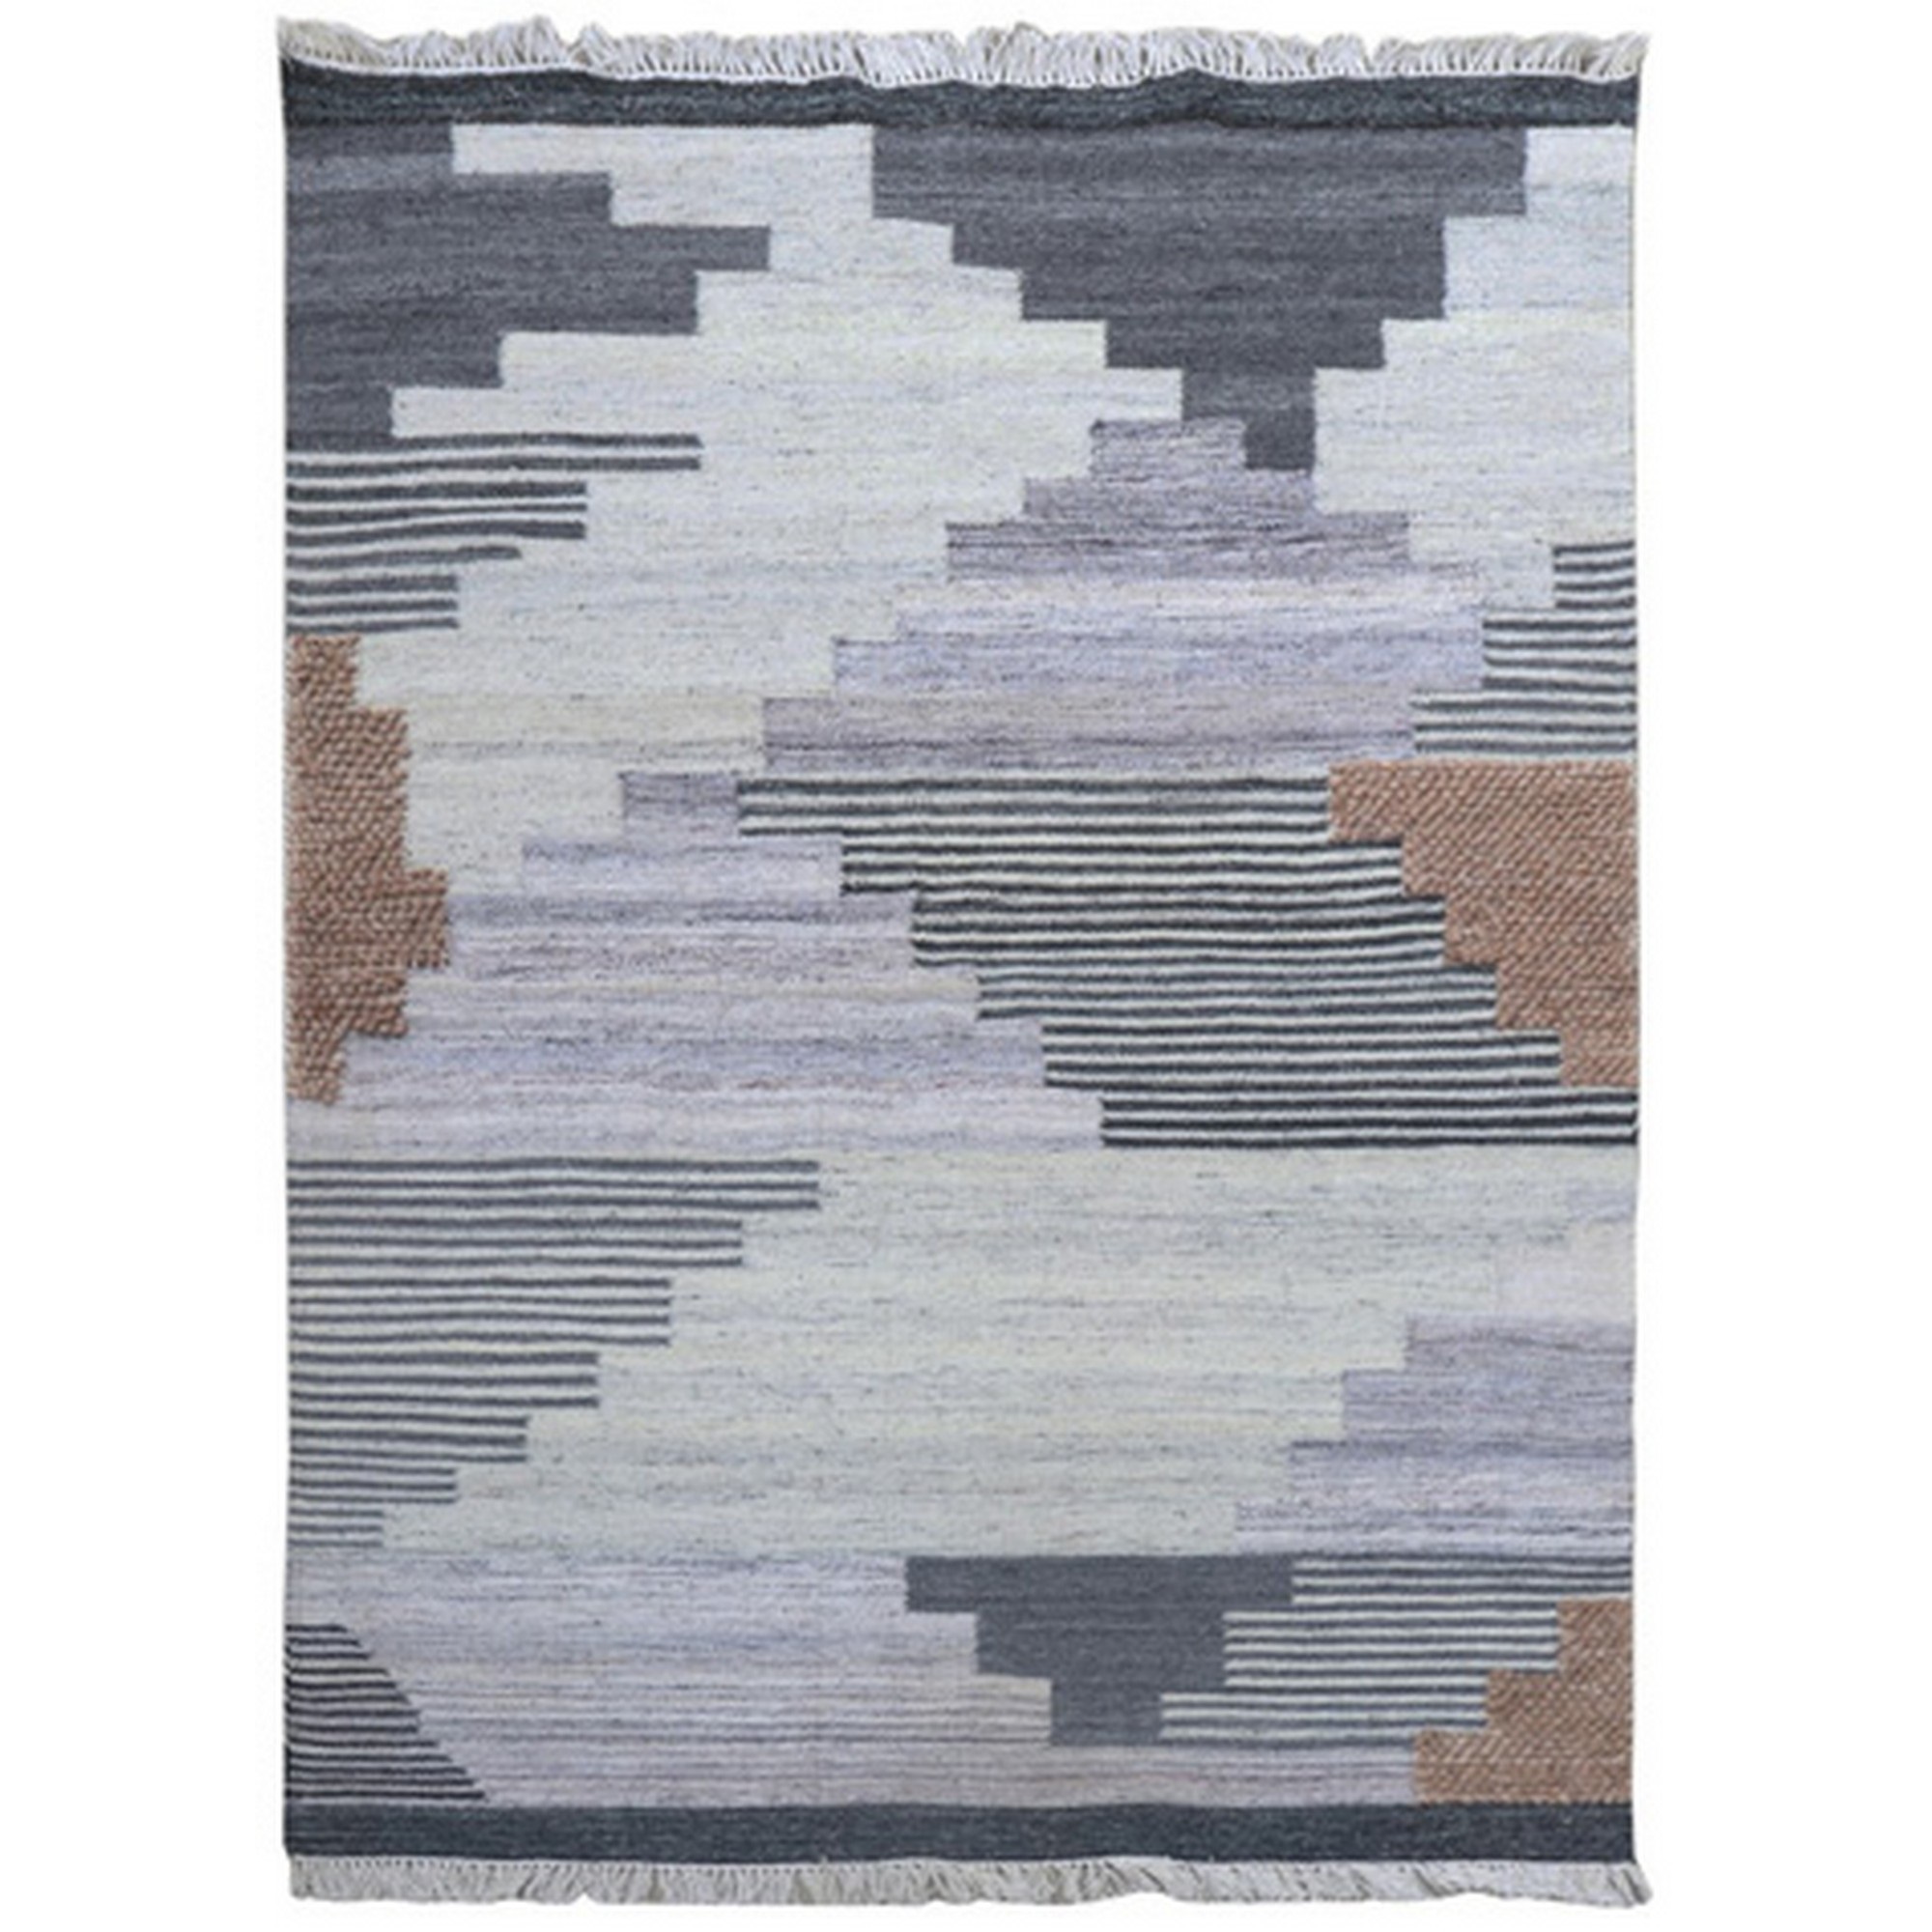 Benjara 7 x 5 Modern Area Rug, Abstract Angled Cube Pattern, Soft Fabric Multicolor